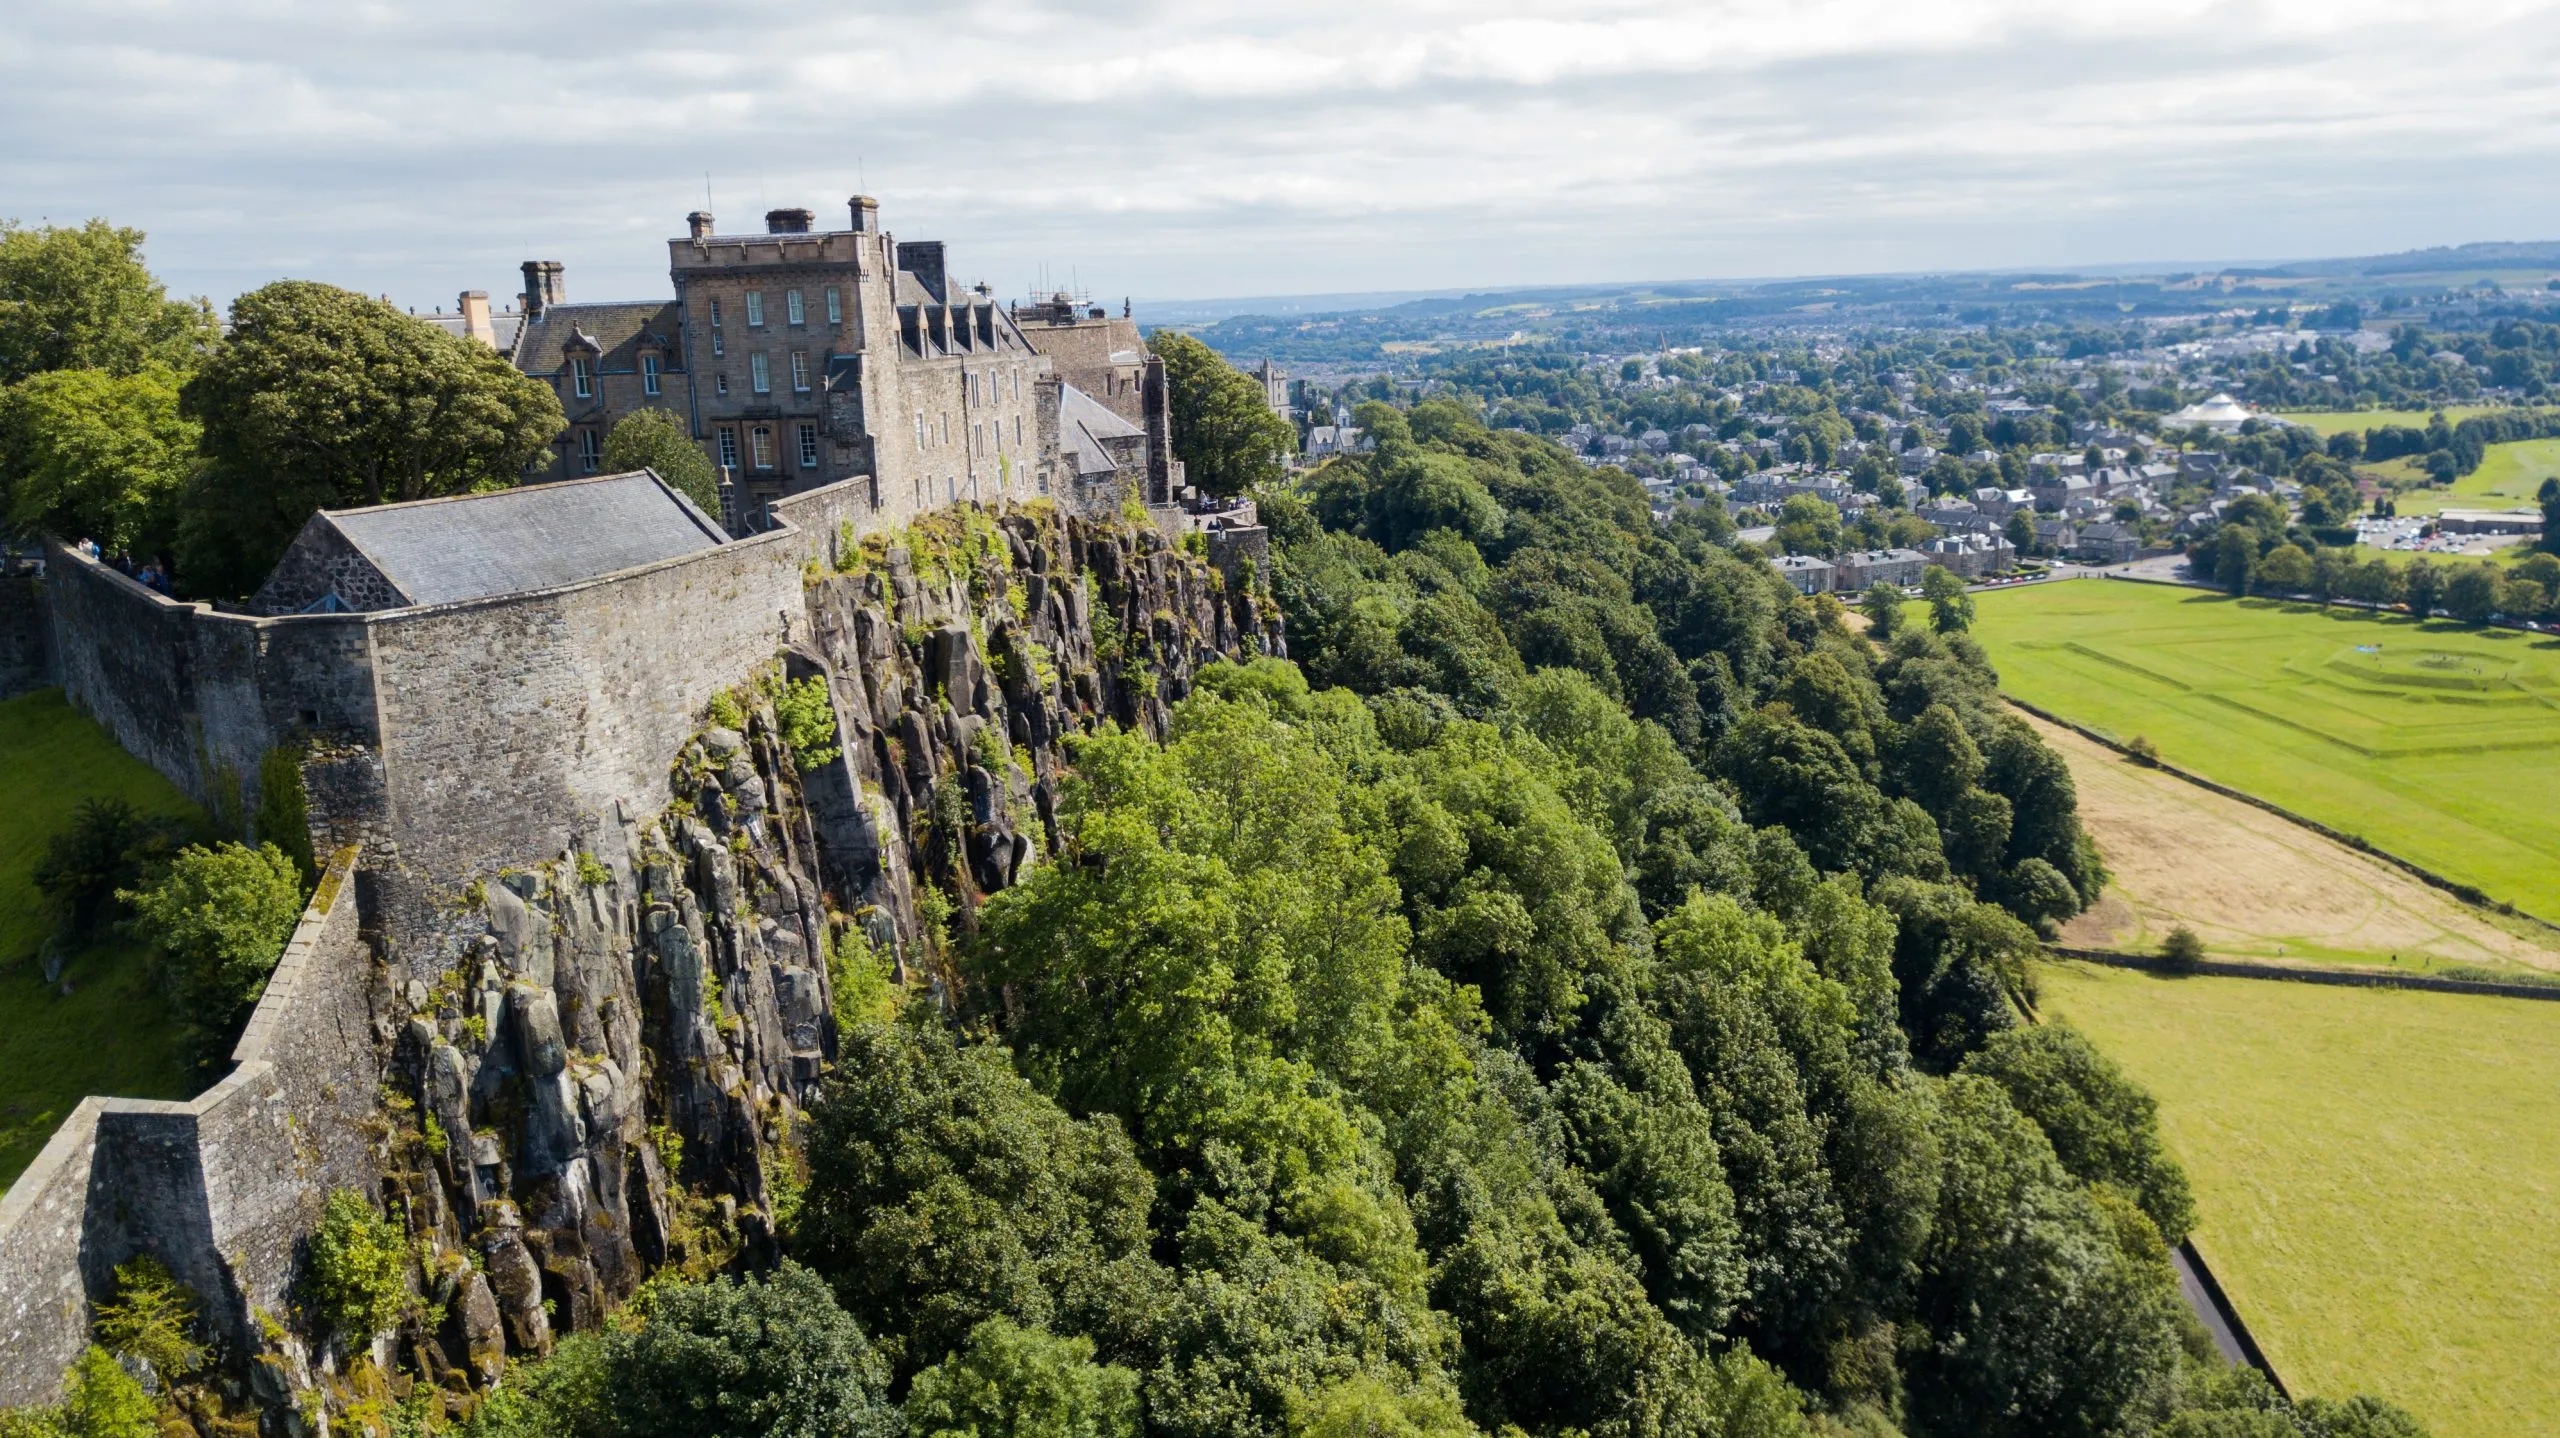 Uncover the illustrious past of Stirling Castle